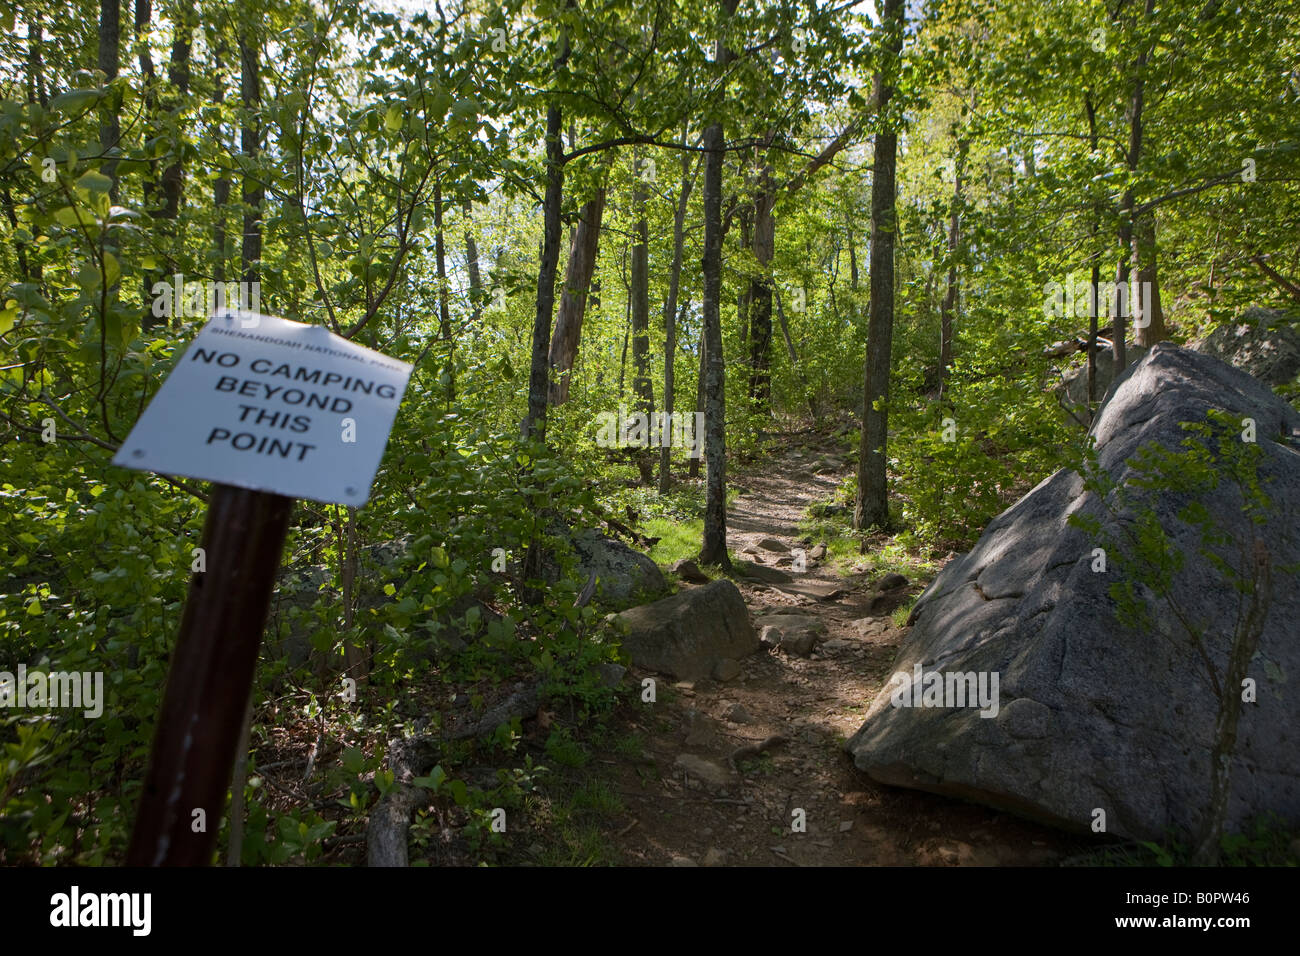 A sign denoting no camping along Ridge Trail Camping above 2 800 feet in elevation is prohibited by the NPS on Old Rag Mt VA USA Stock Photo